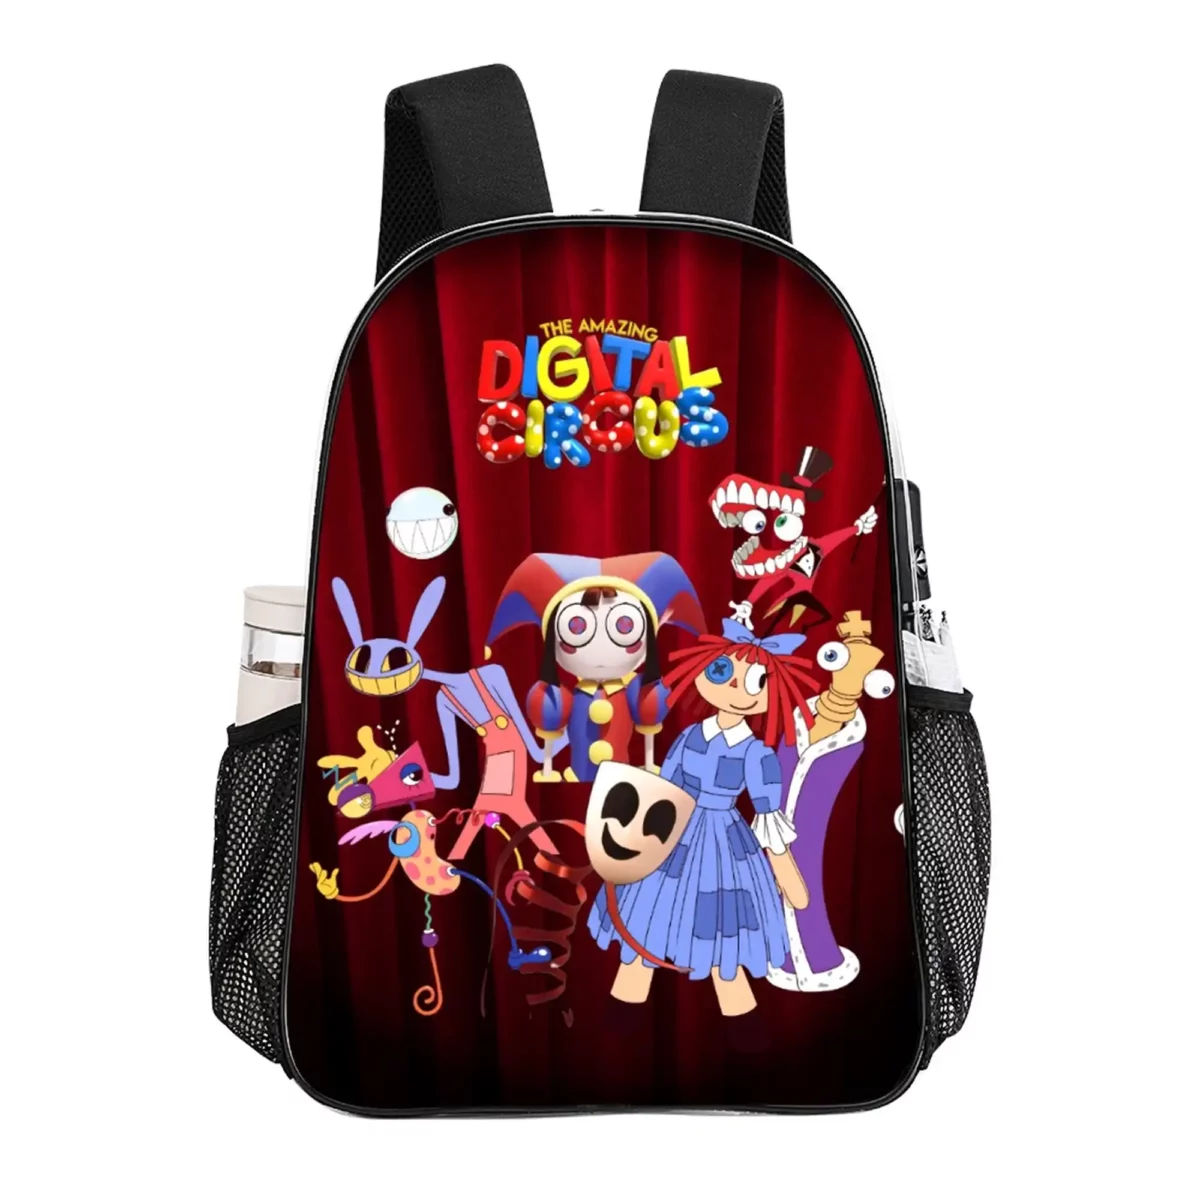 The Amazing Digital Circus Transparent Backpack – 17 Inches Book Bag Cool Kiddo 14